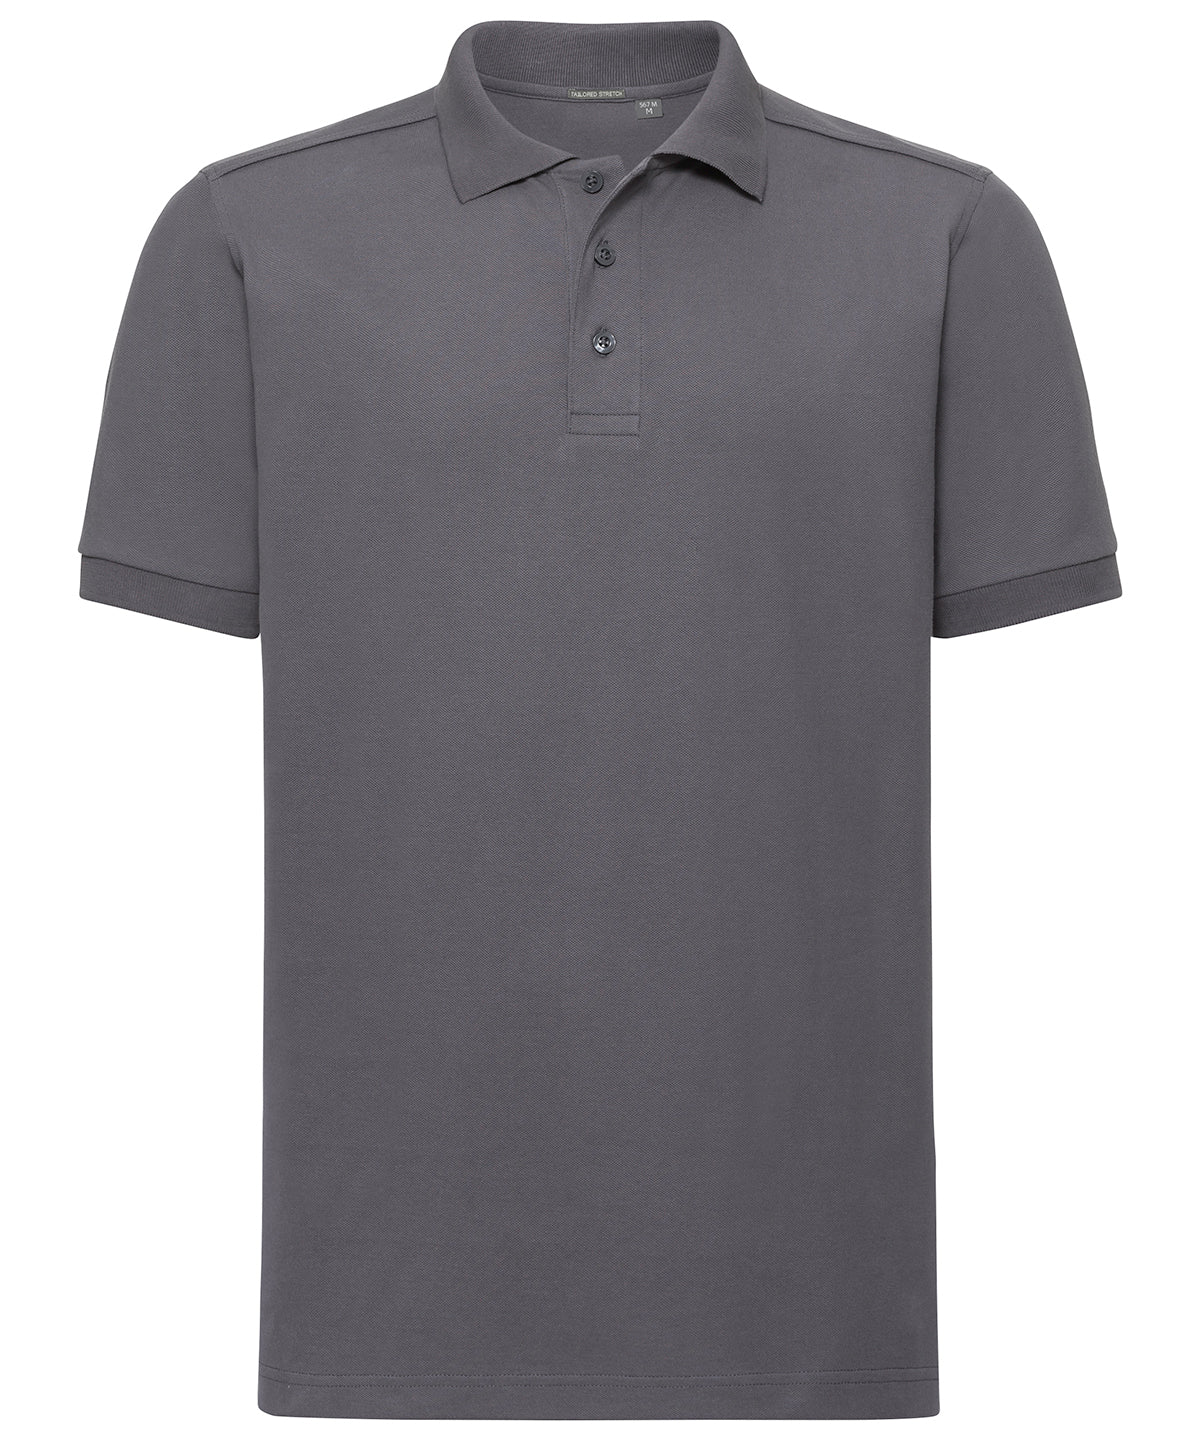 J567M Russell Europe Convoy Grey Tailored stretch polo